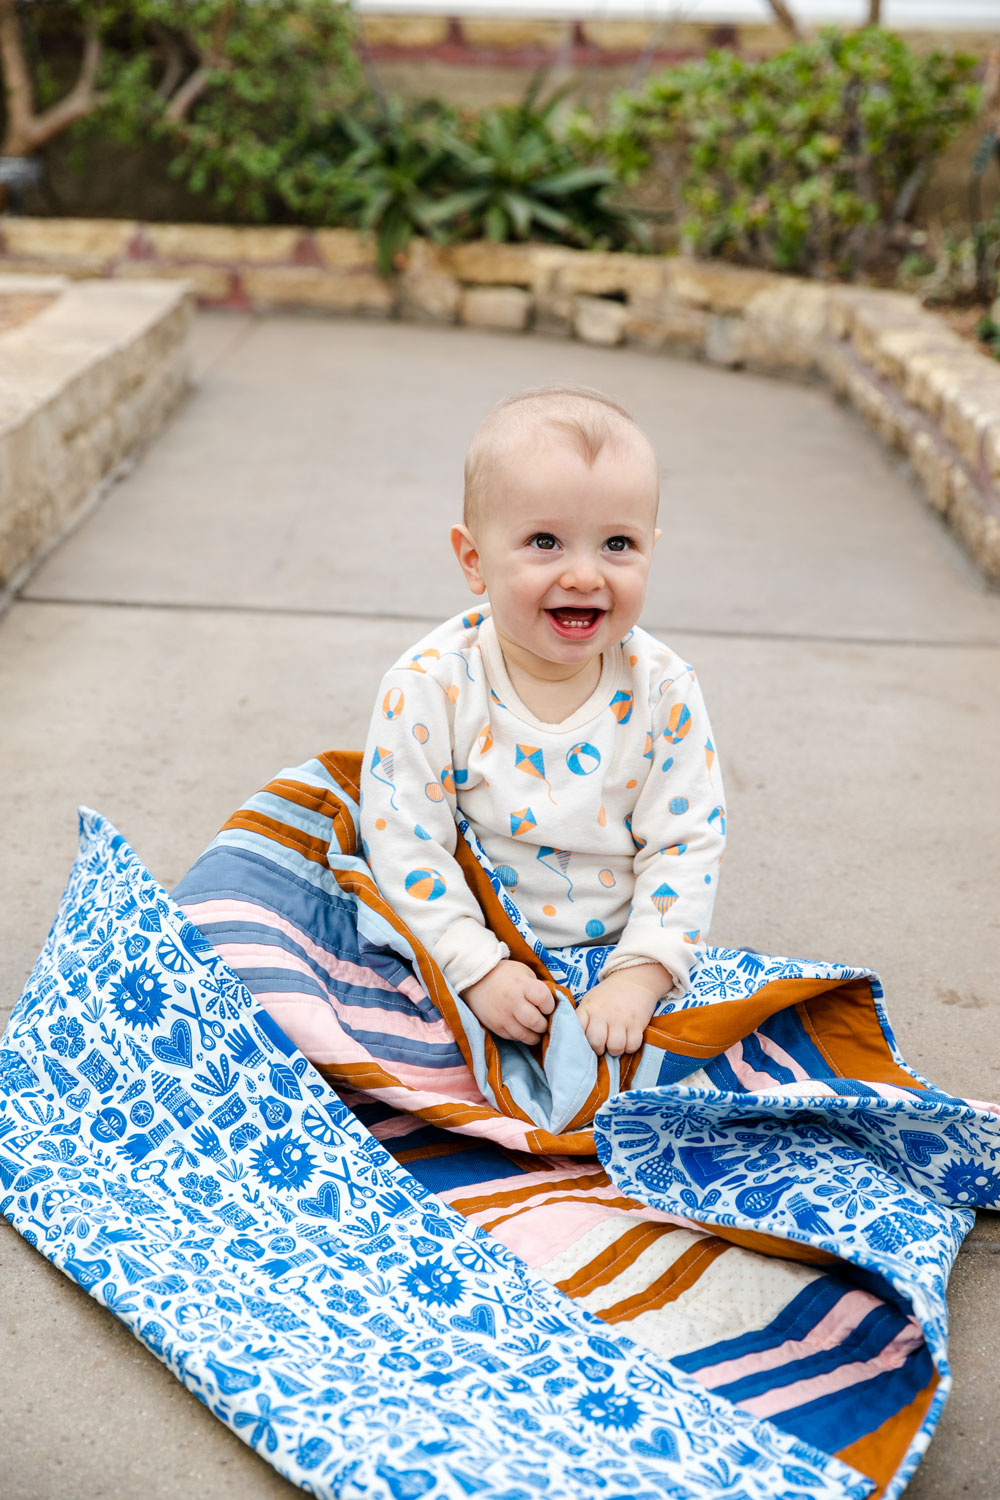 The Grow quilt pattern release March 12, 2020. It will include king, queen, twin, throw and baby quilt sizes. suzyquilts.com #modernbabyquilt